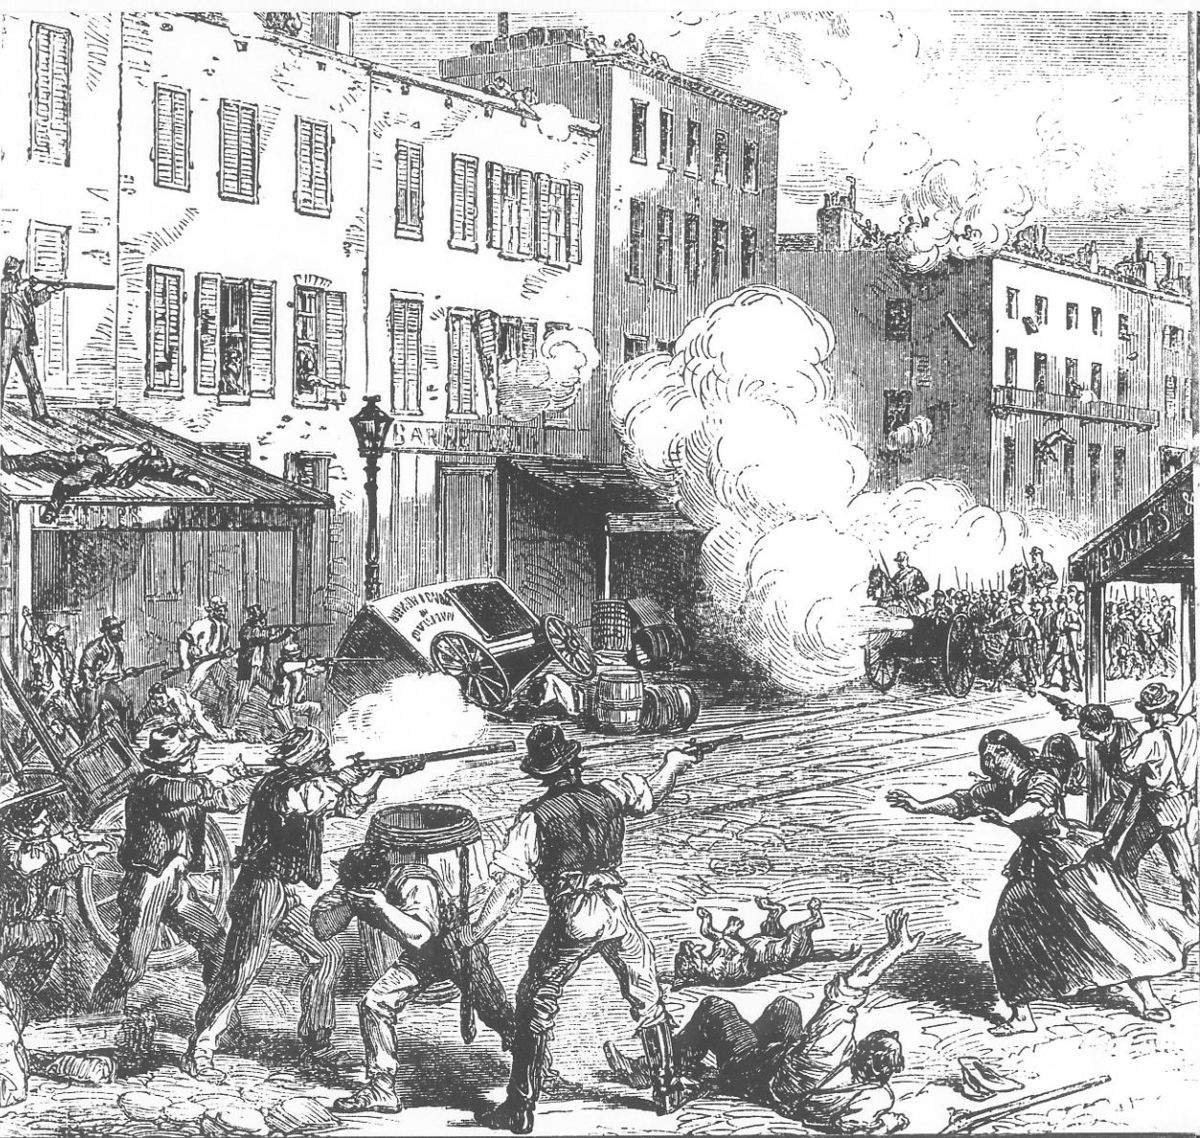 The Anti-Abolition Riots, NYC, 1834Week long riot, put down by military force. Resentment of Black Americans caused rioters to control whole sections of the city while they attacked the homes, businesses, and churches of abolitionist leaders & ransacked black neighborhoods.